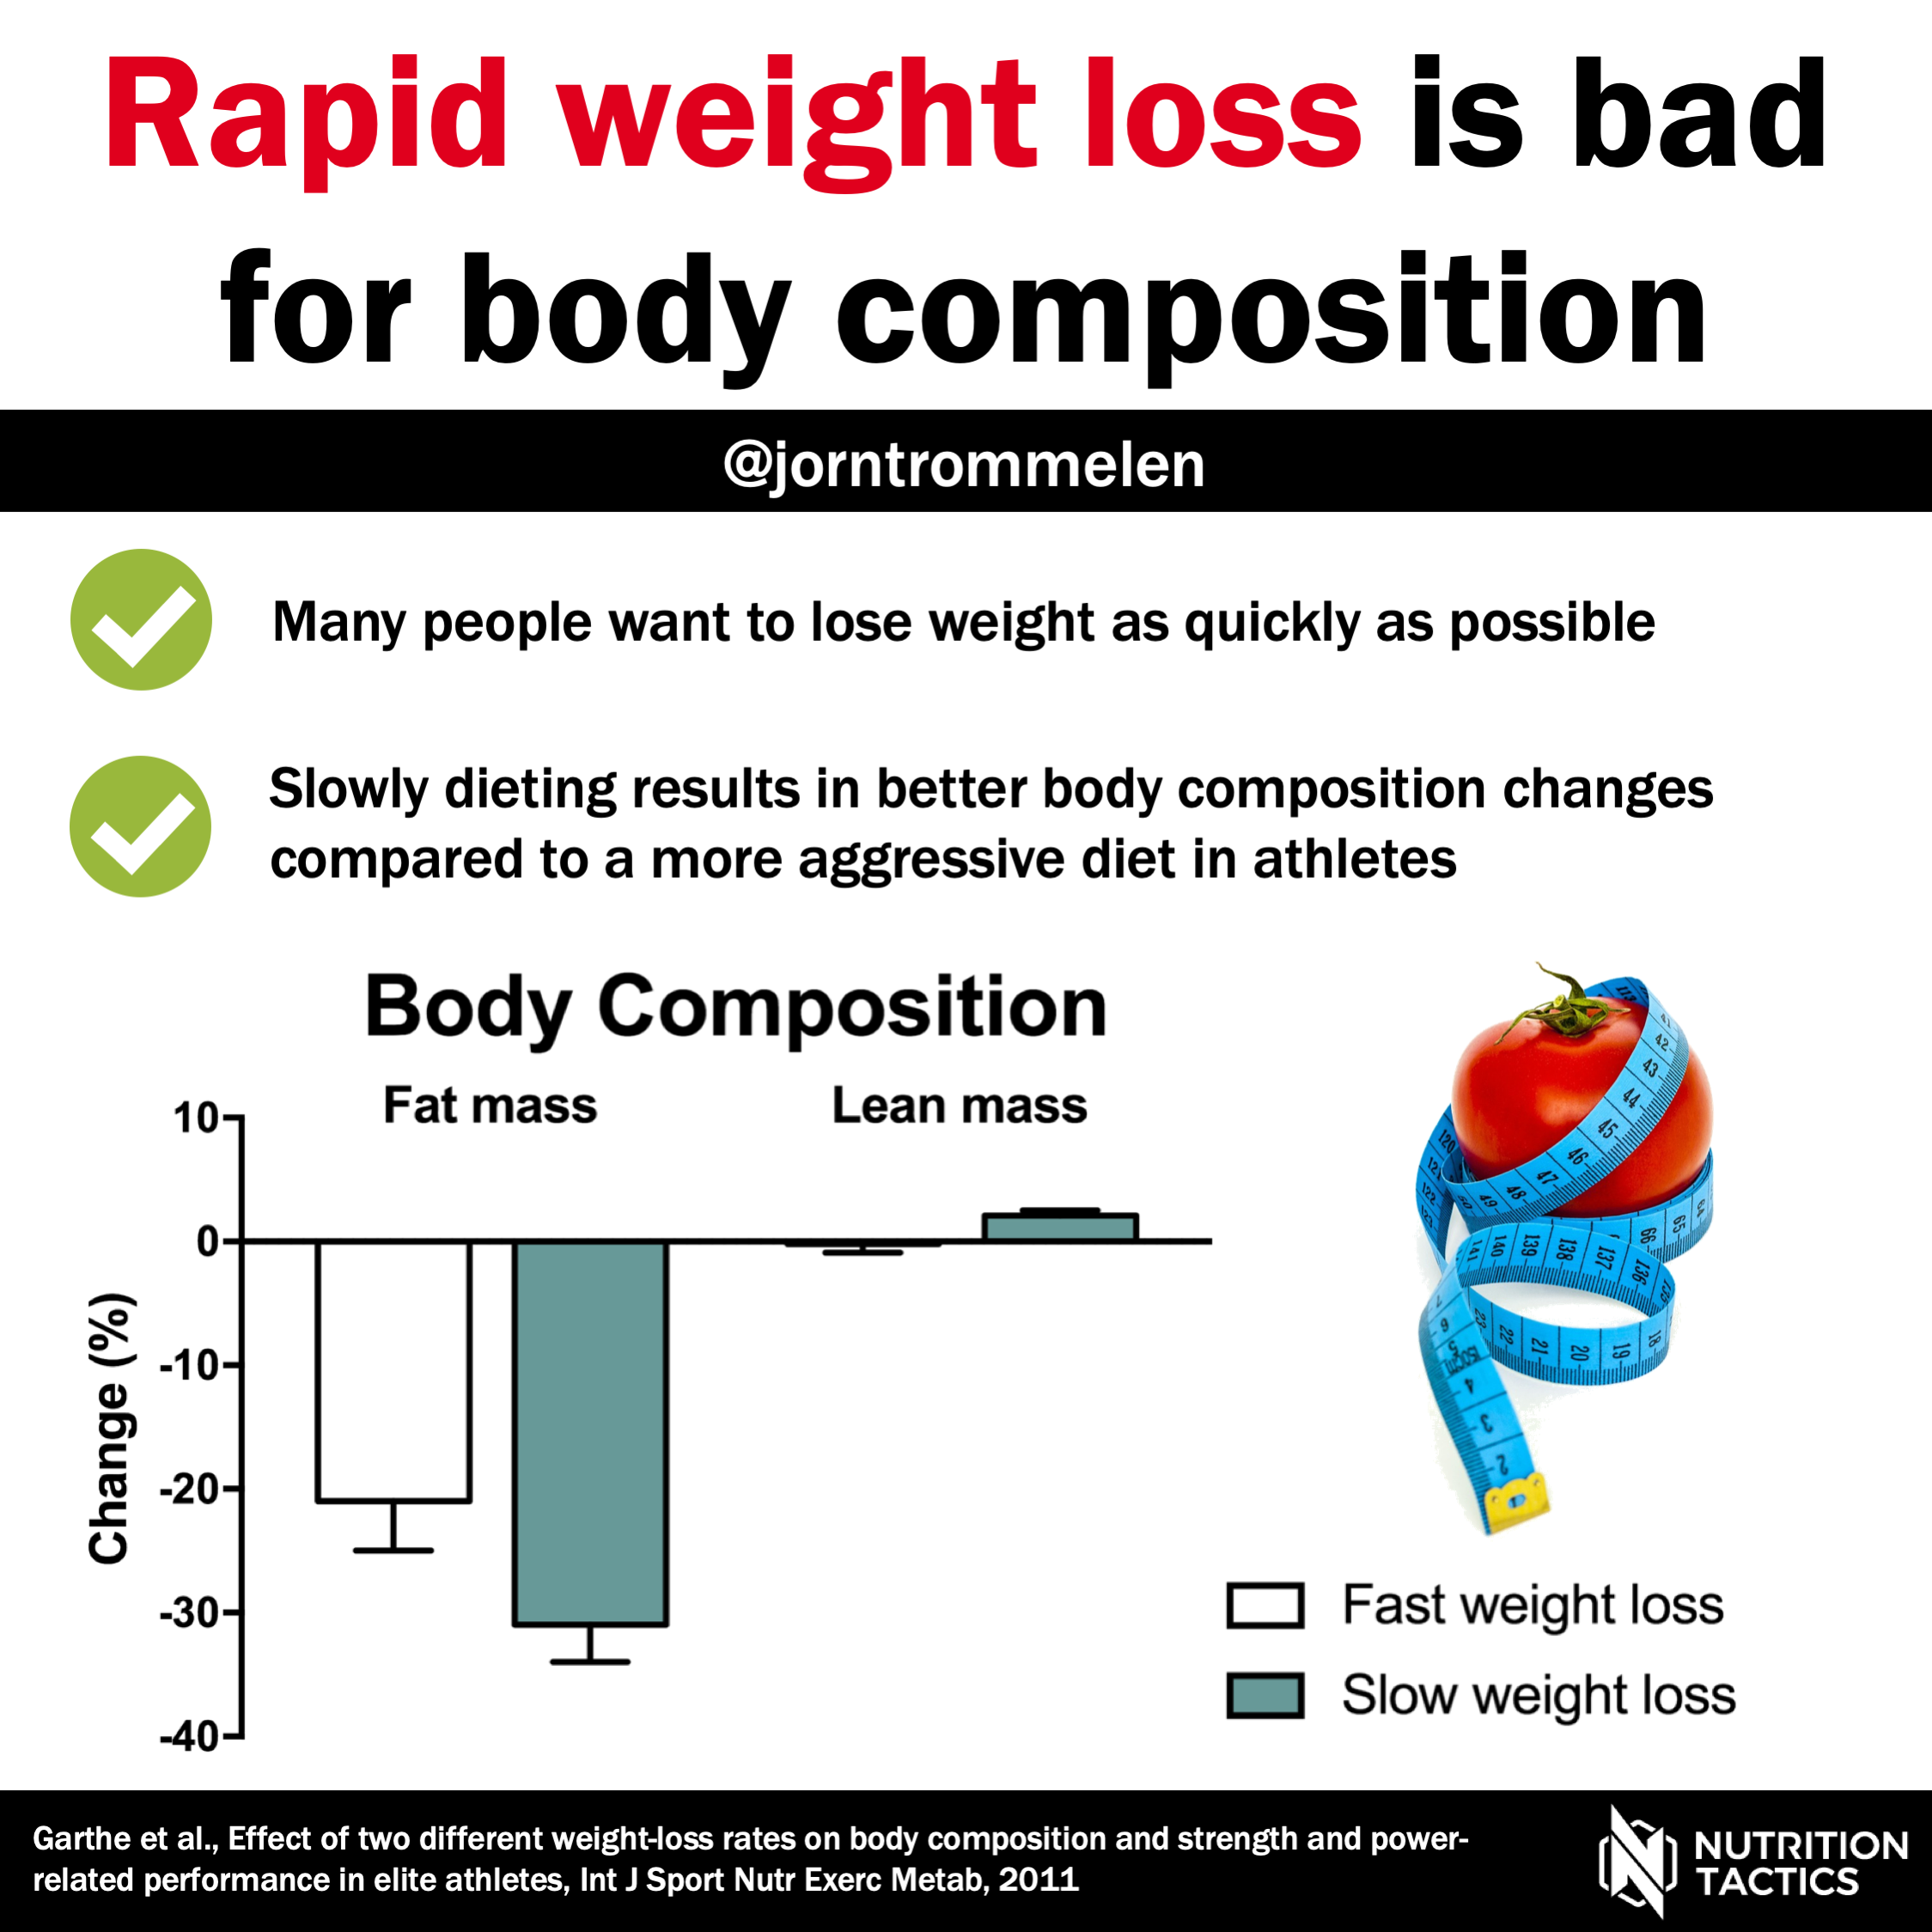 Body composition and weight gain